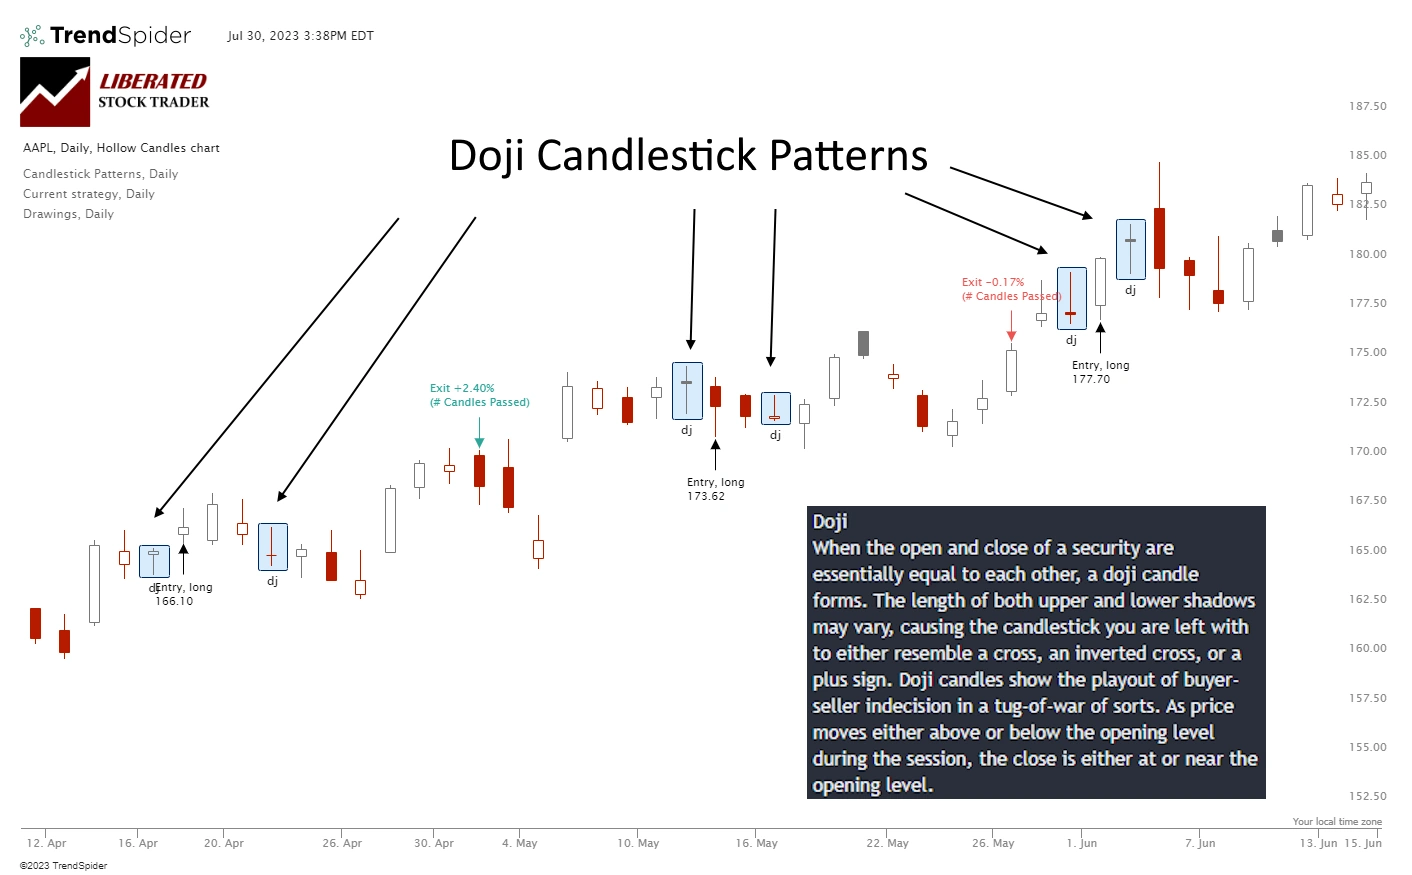 Doji candles indicate market indecision, which could signal potential trend reversals or continuation, depending on the recent price action.